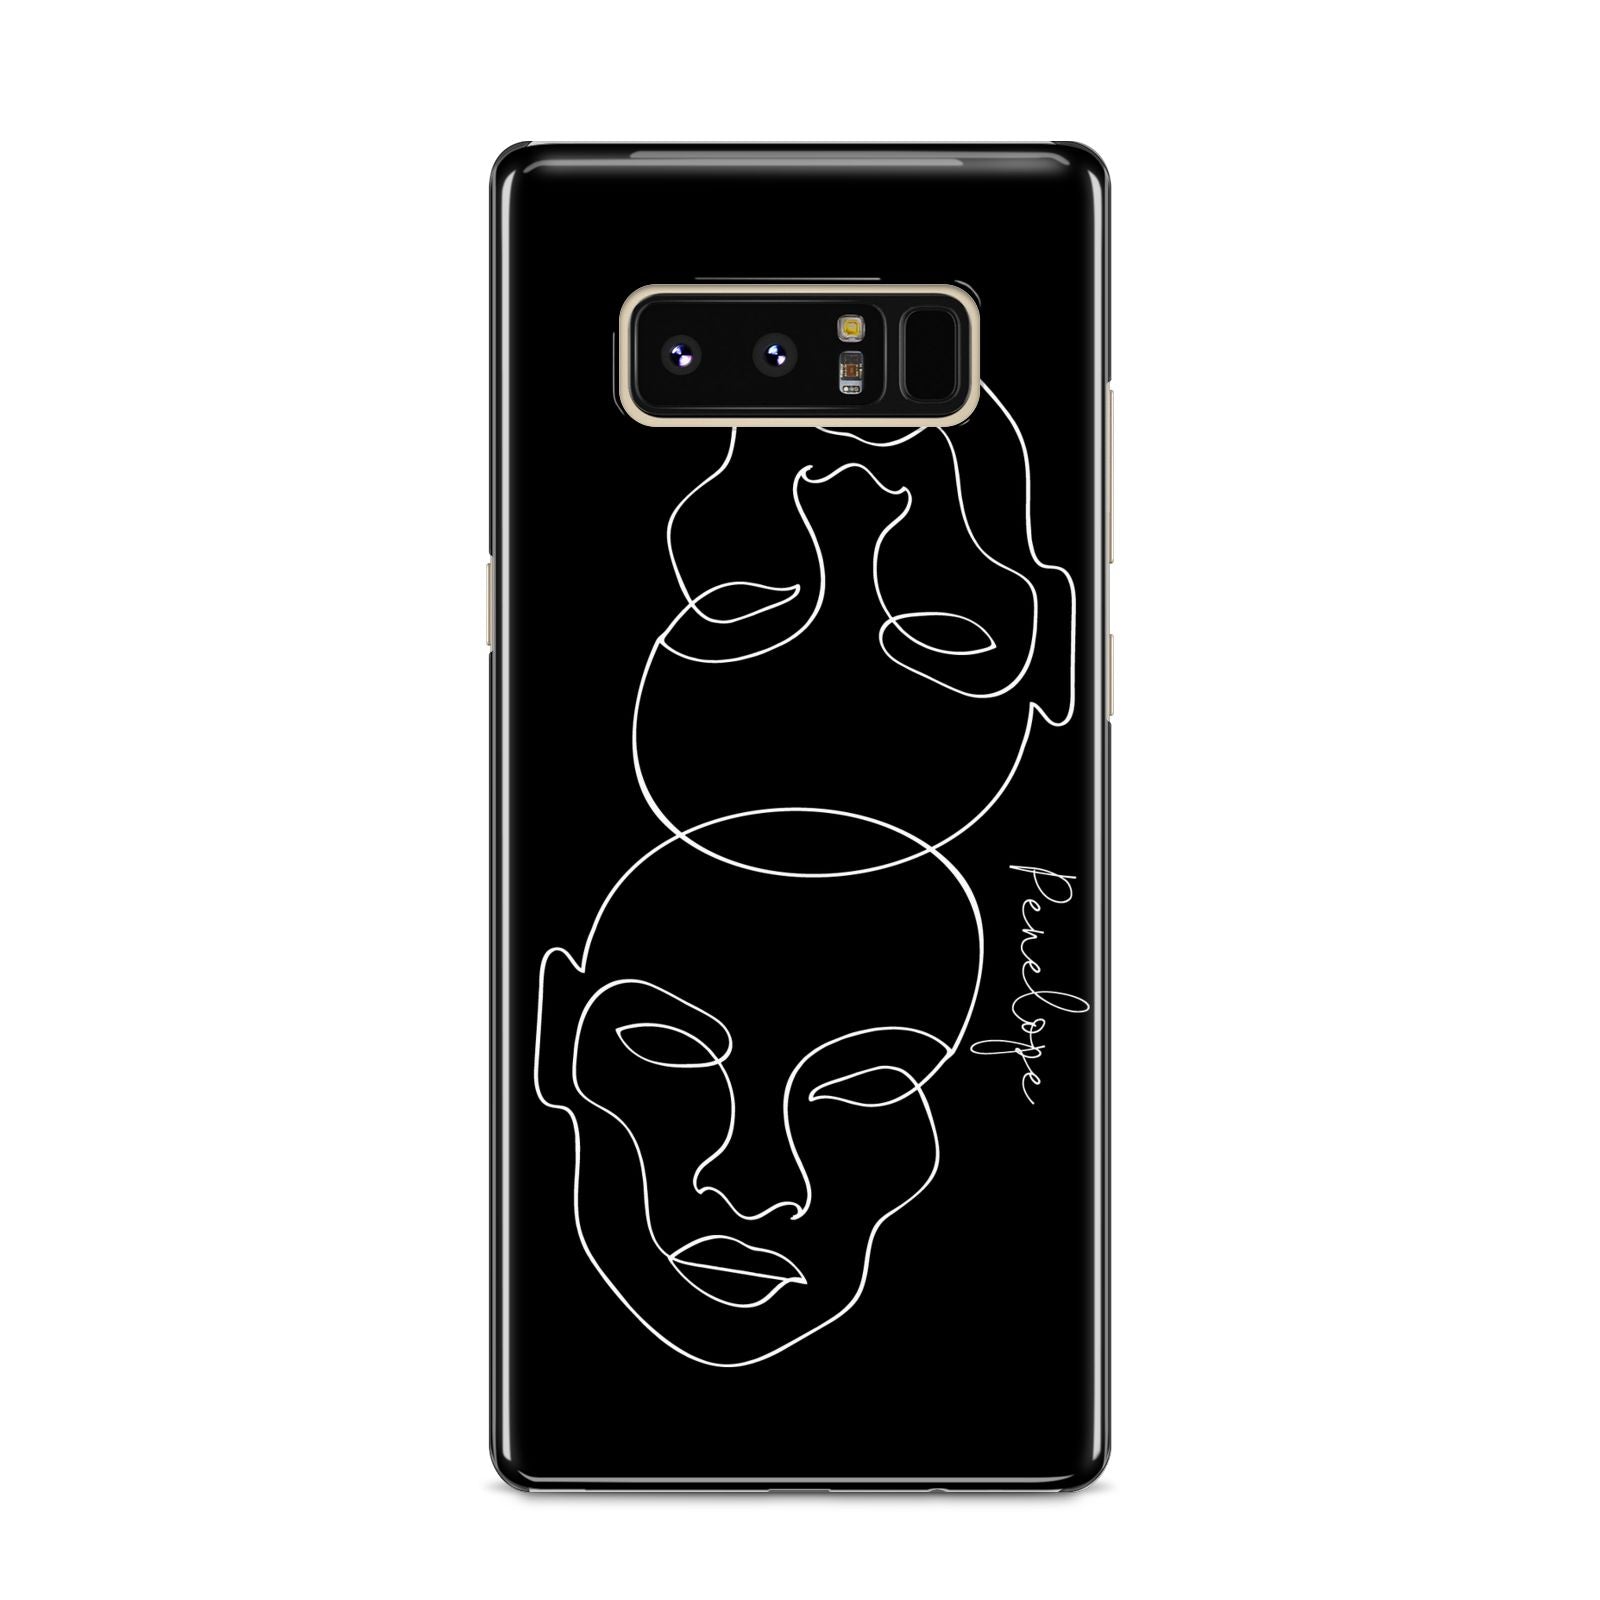 Personalised Abstract Line Art Samsung Galaxy S8 Case